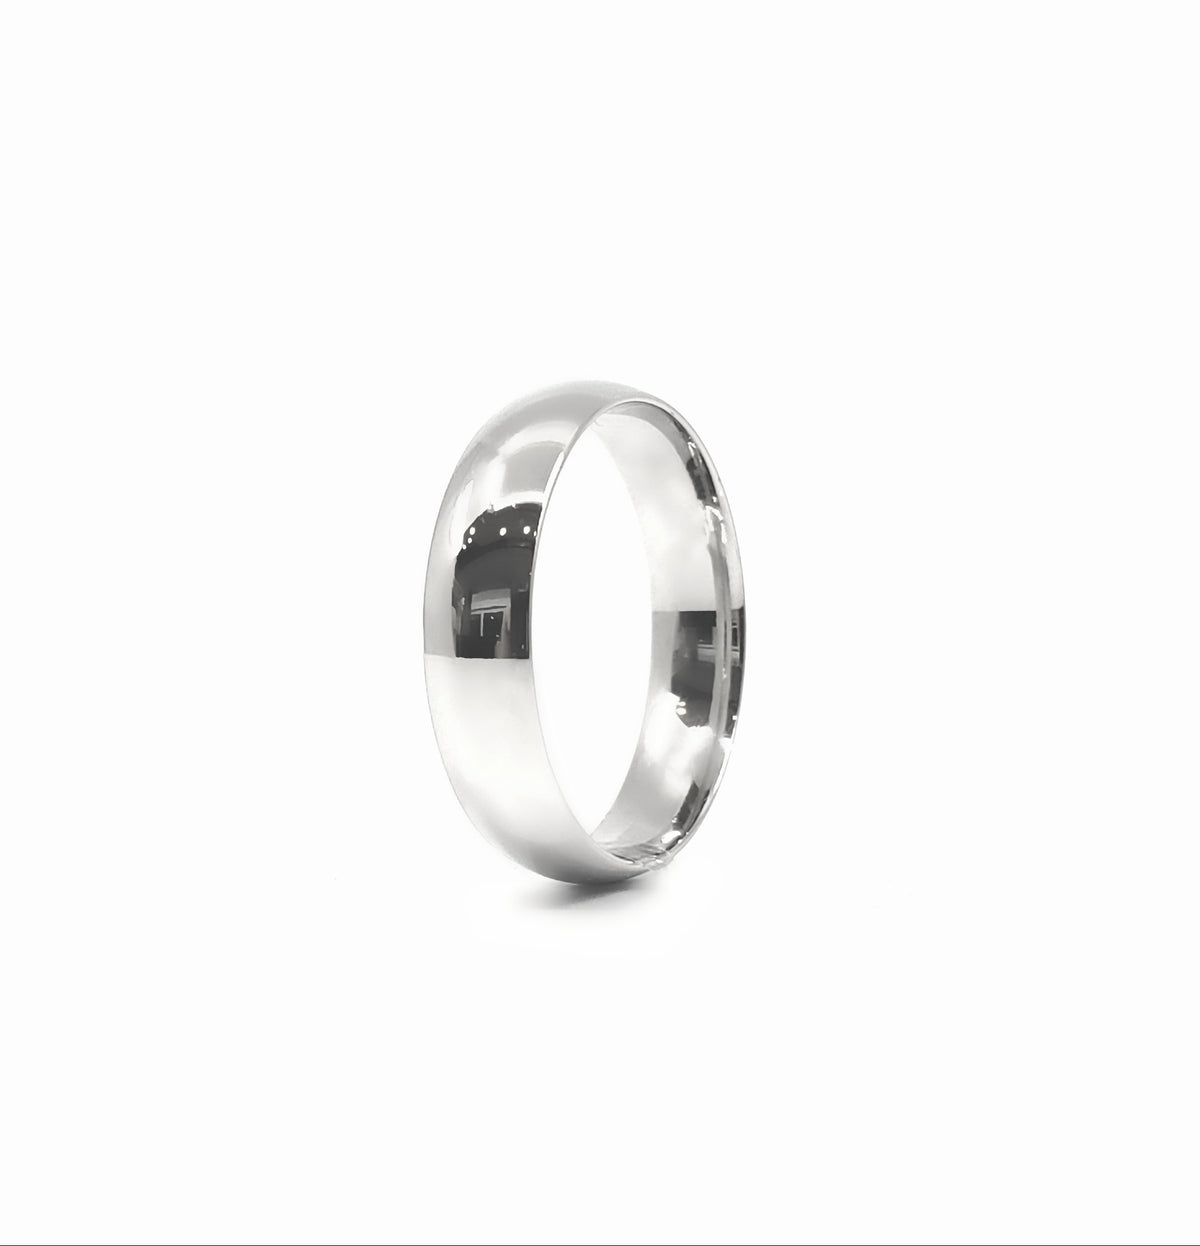 10K White Gold 5mm Comfort Fit Wedding Band - Size 10